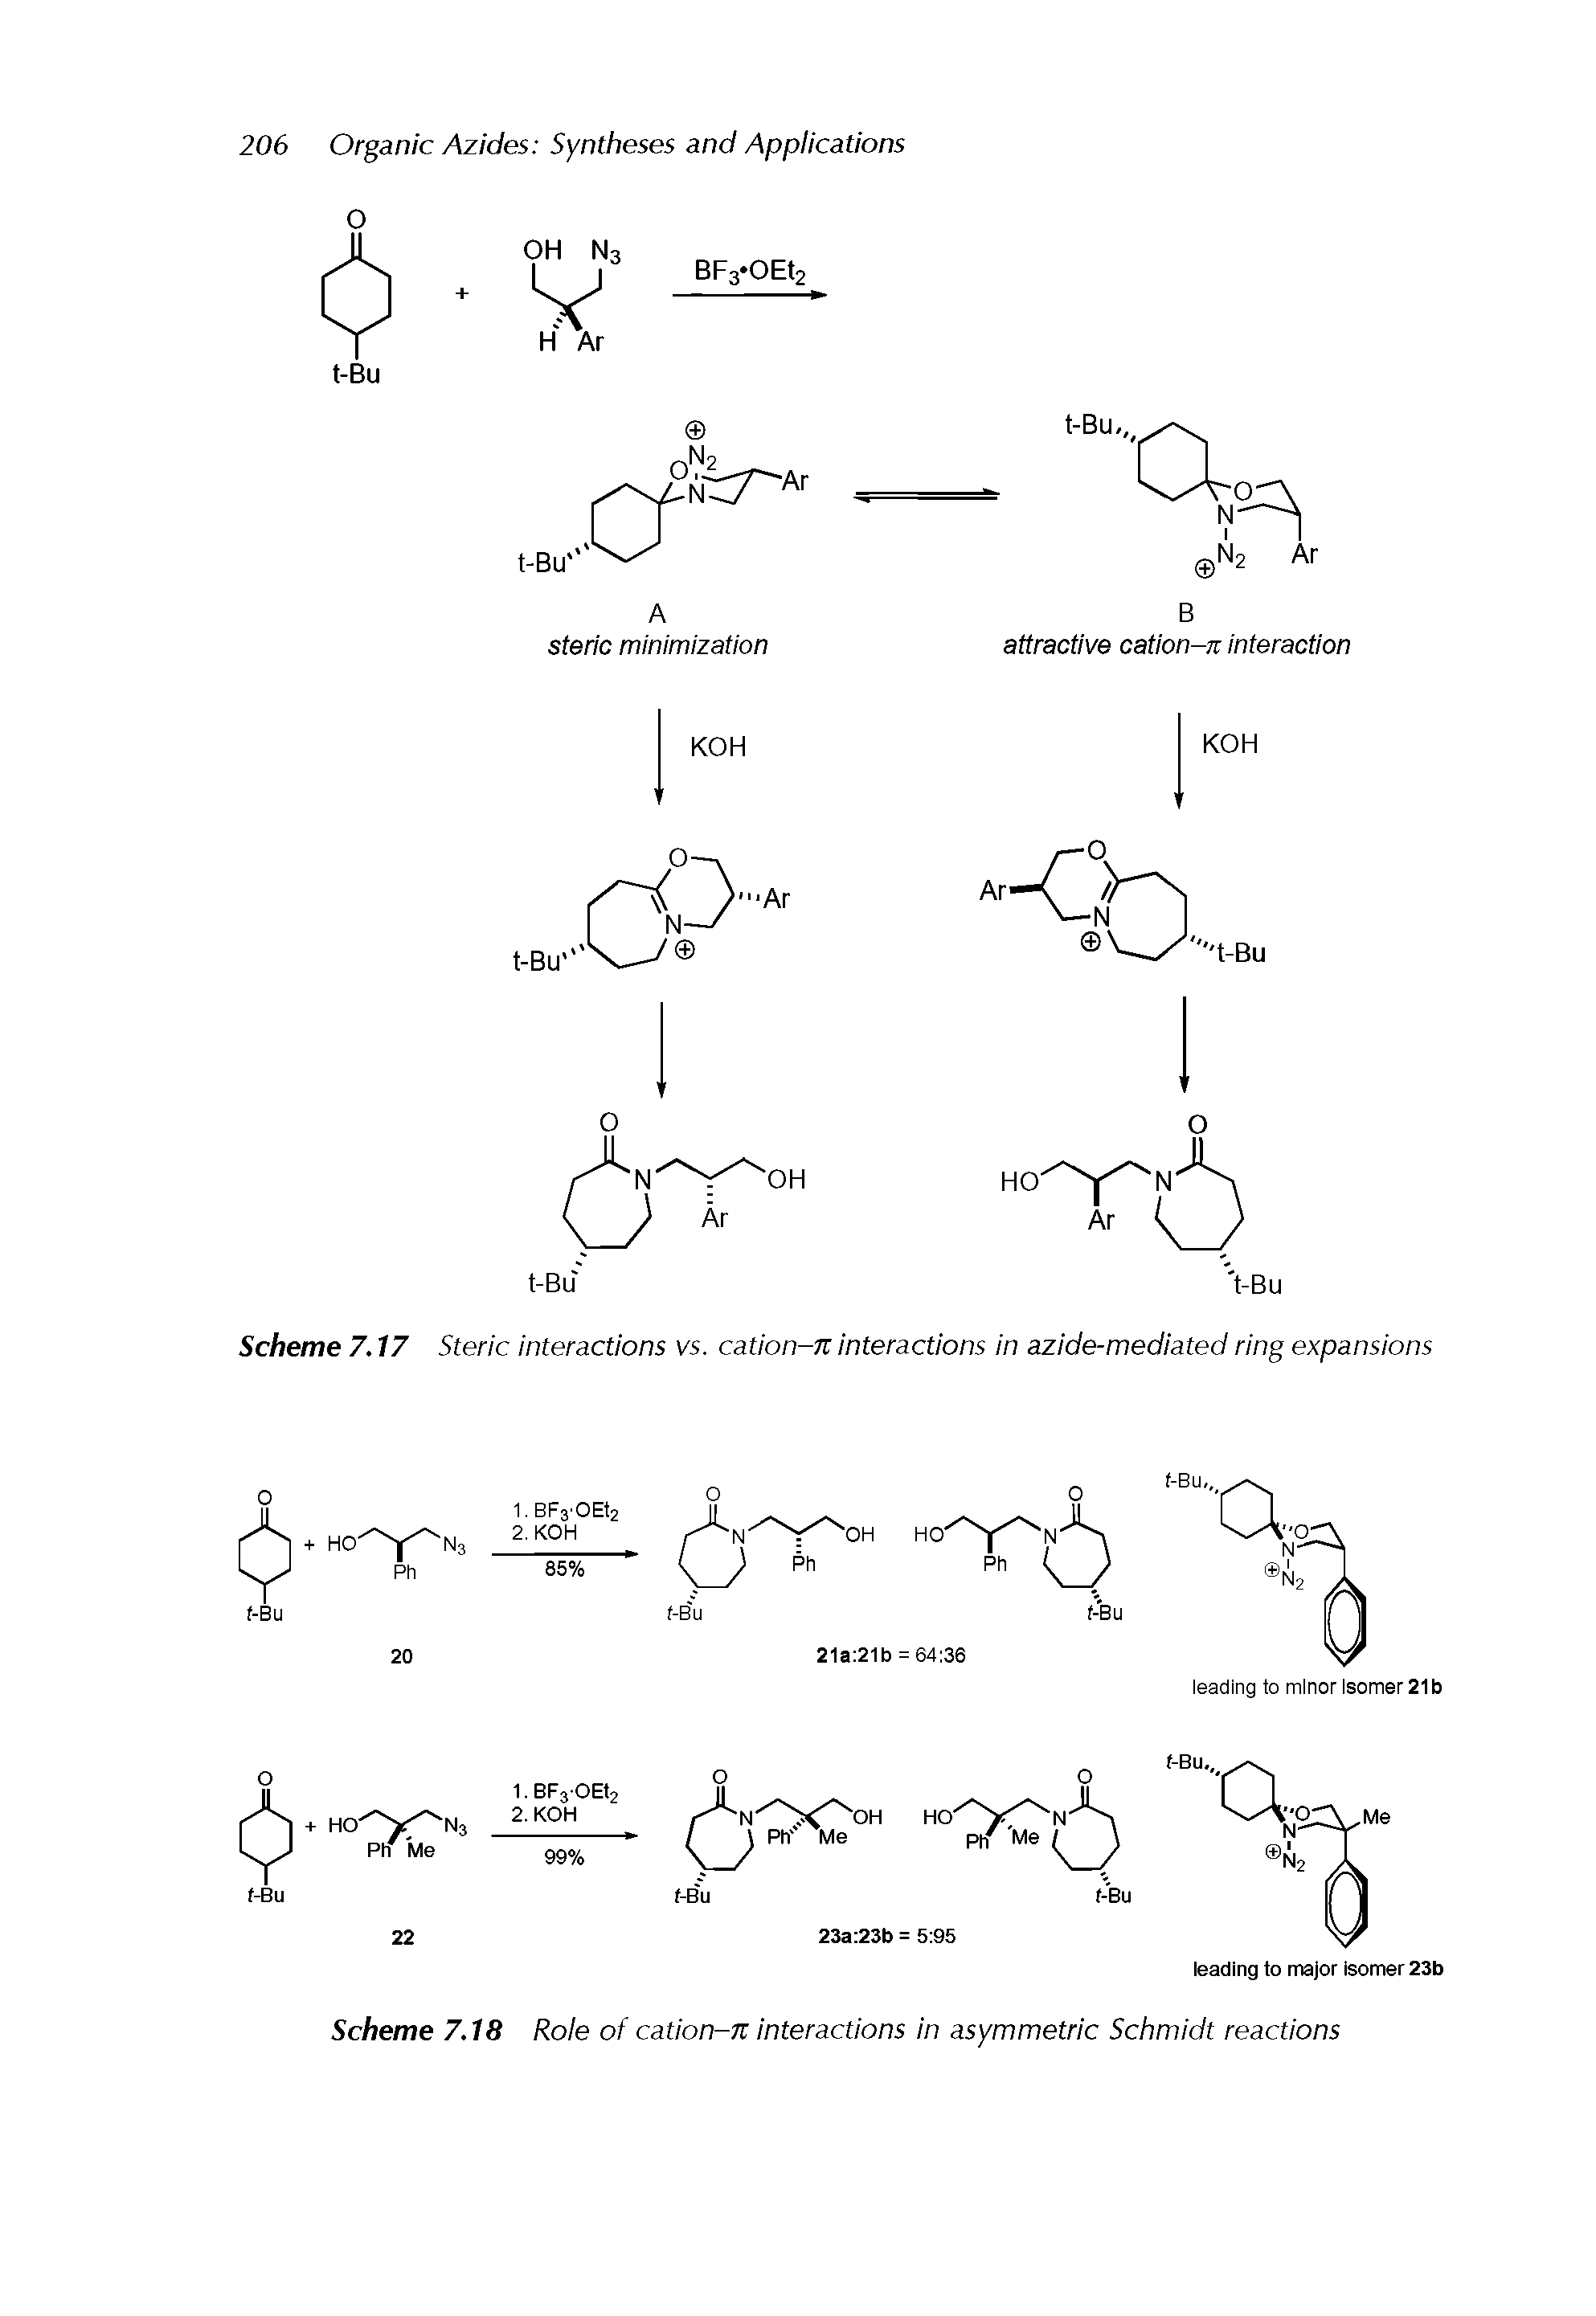 Scheme 7.18 Role of cation-n interactions in asymmetric Schmidt reactions...